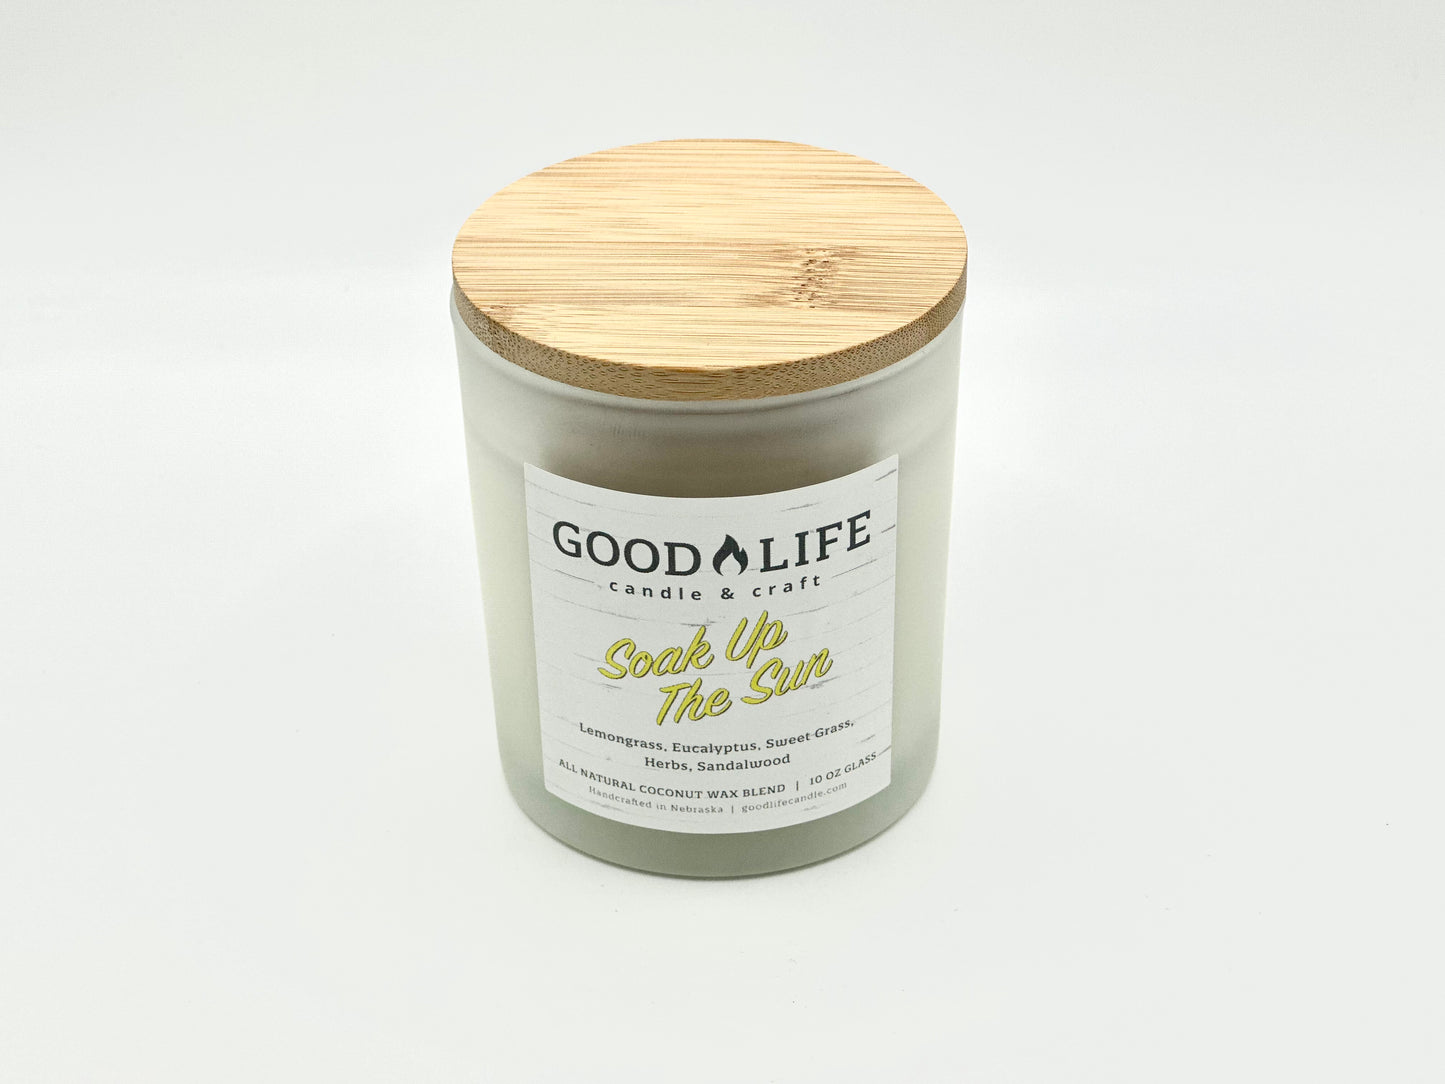 Soak Up The Sun Scented Candle